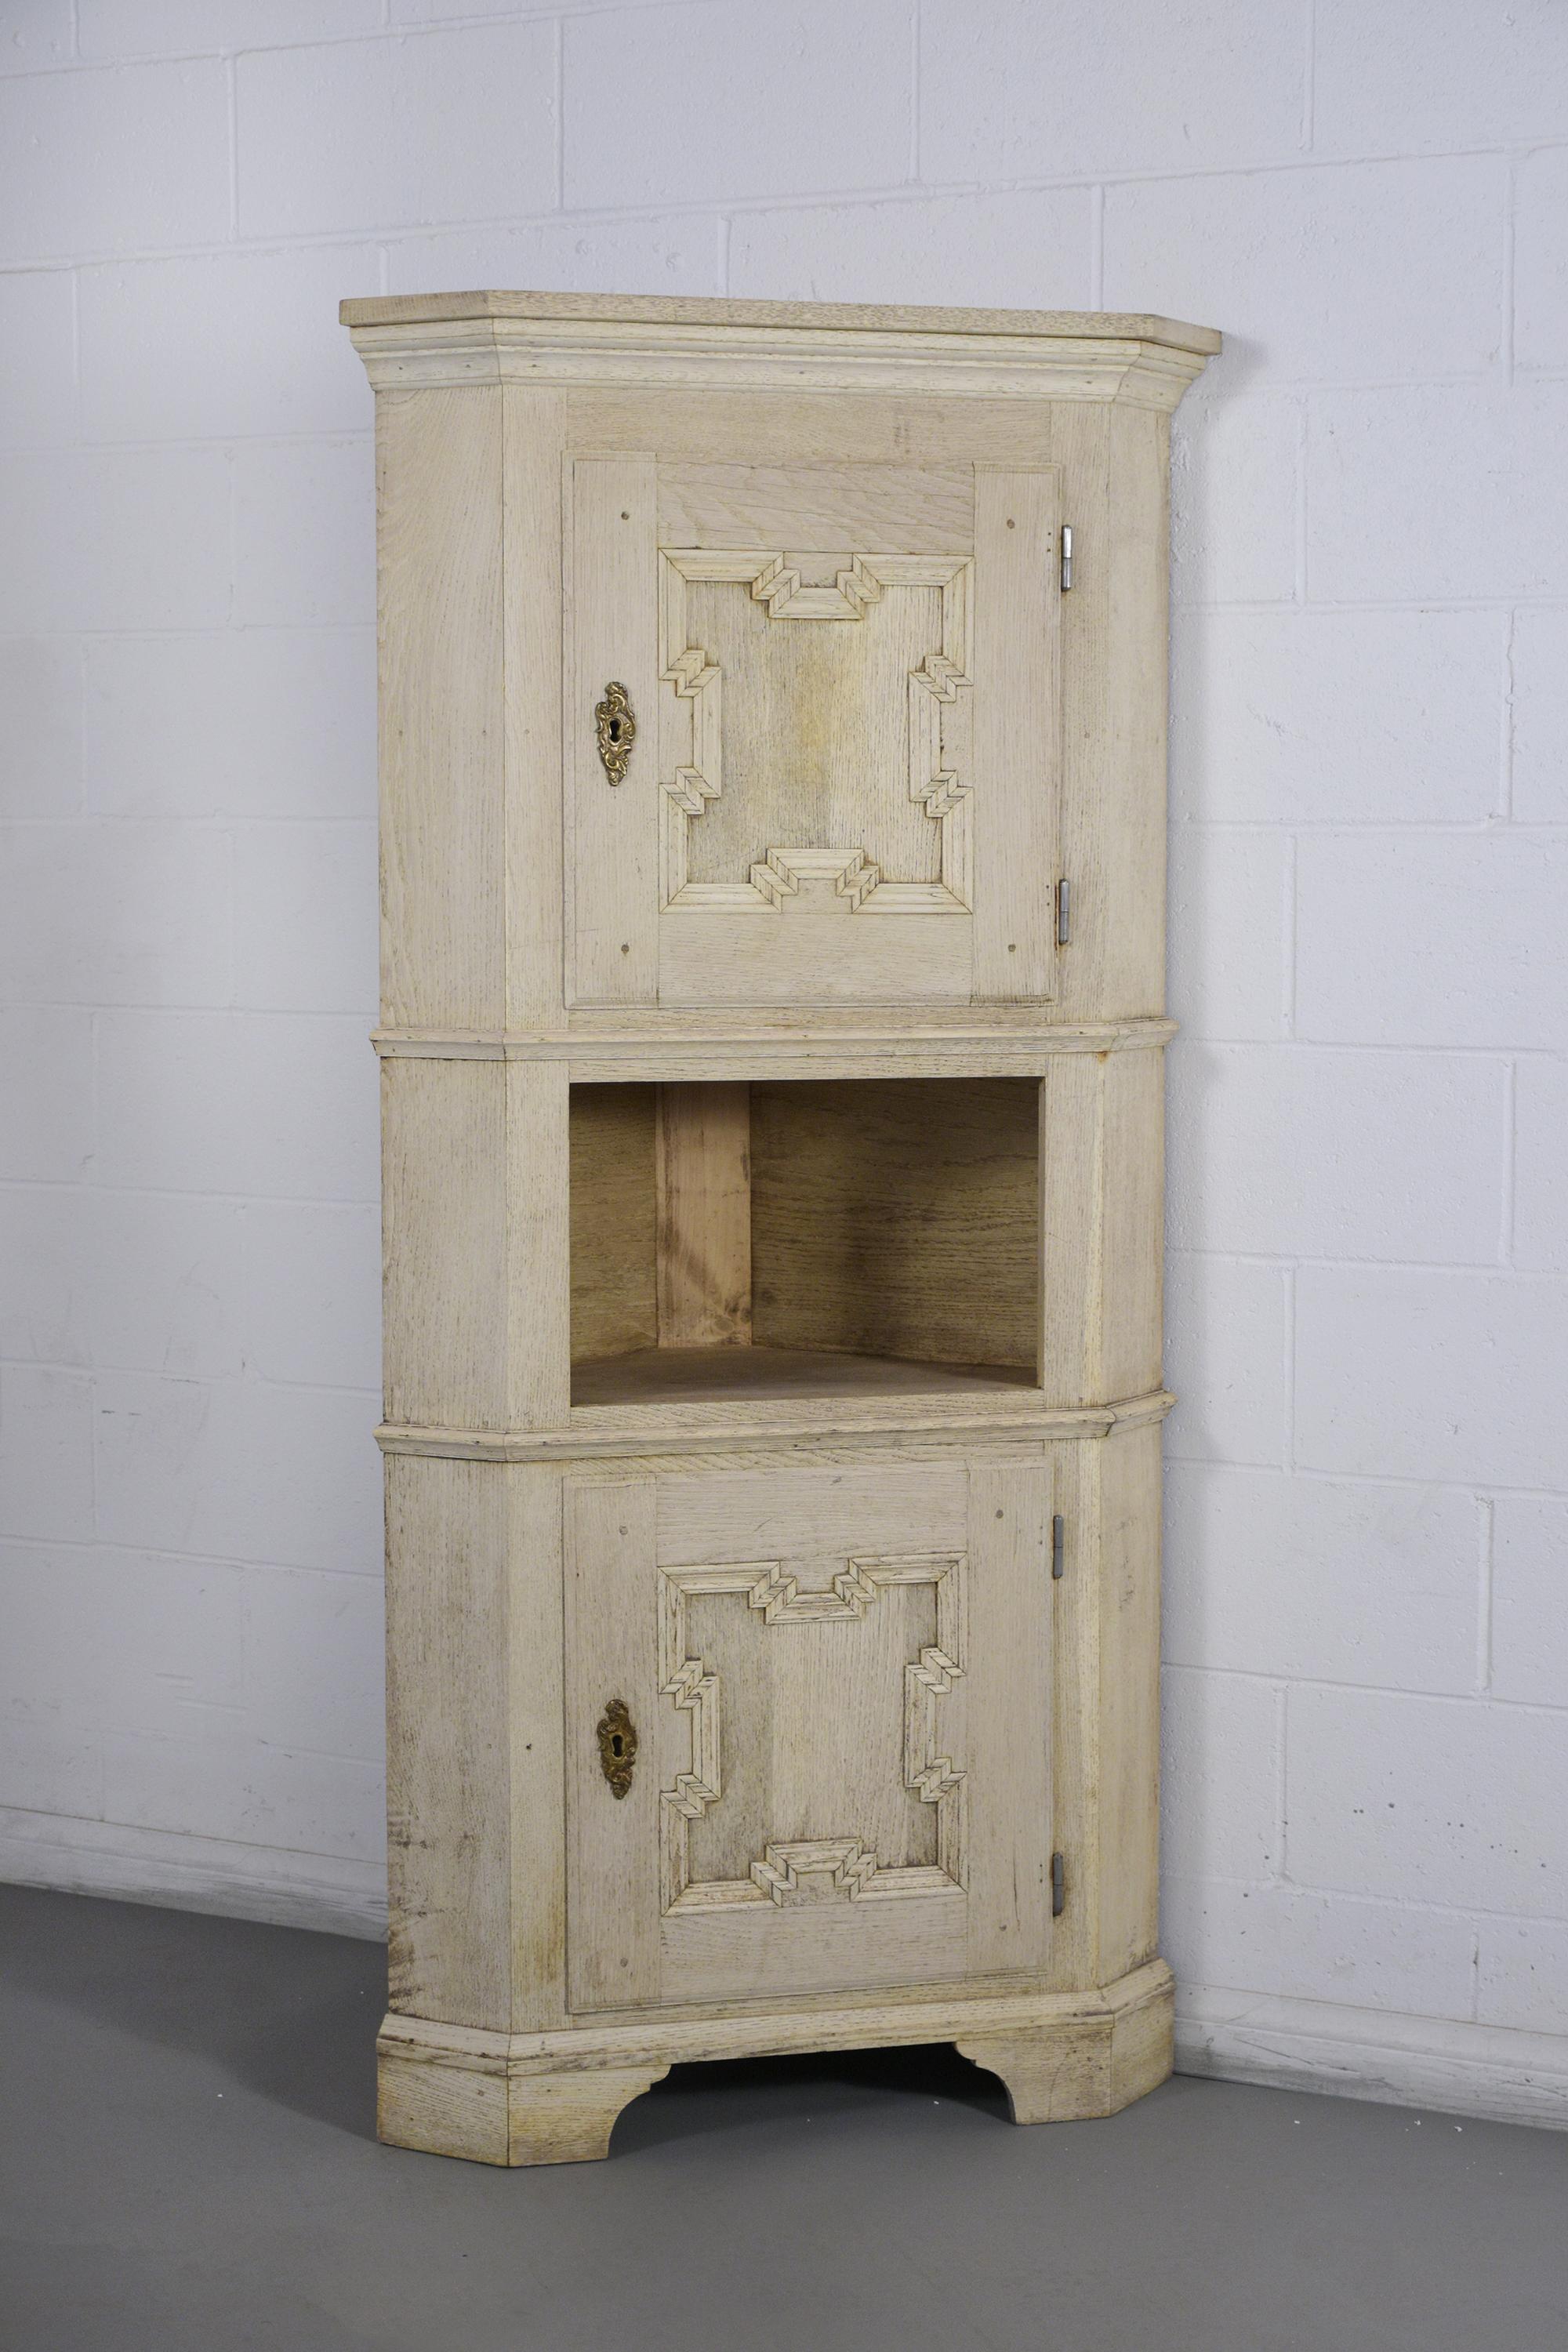 This antique French corner cupboard is made out of oak wood, has been given a newly bleached color finish, and is professionally restored. The corner cabinet has two doors with a carved panel design, original brass keyplates, and an open shelf in